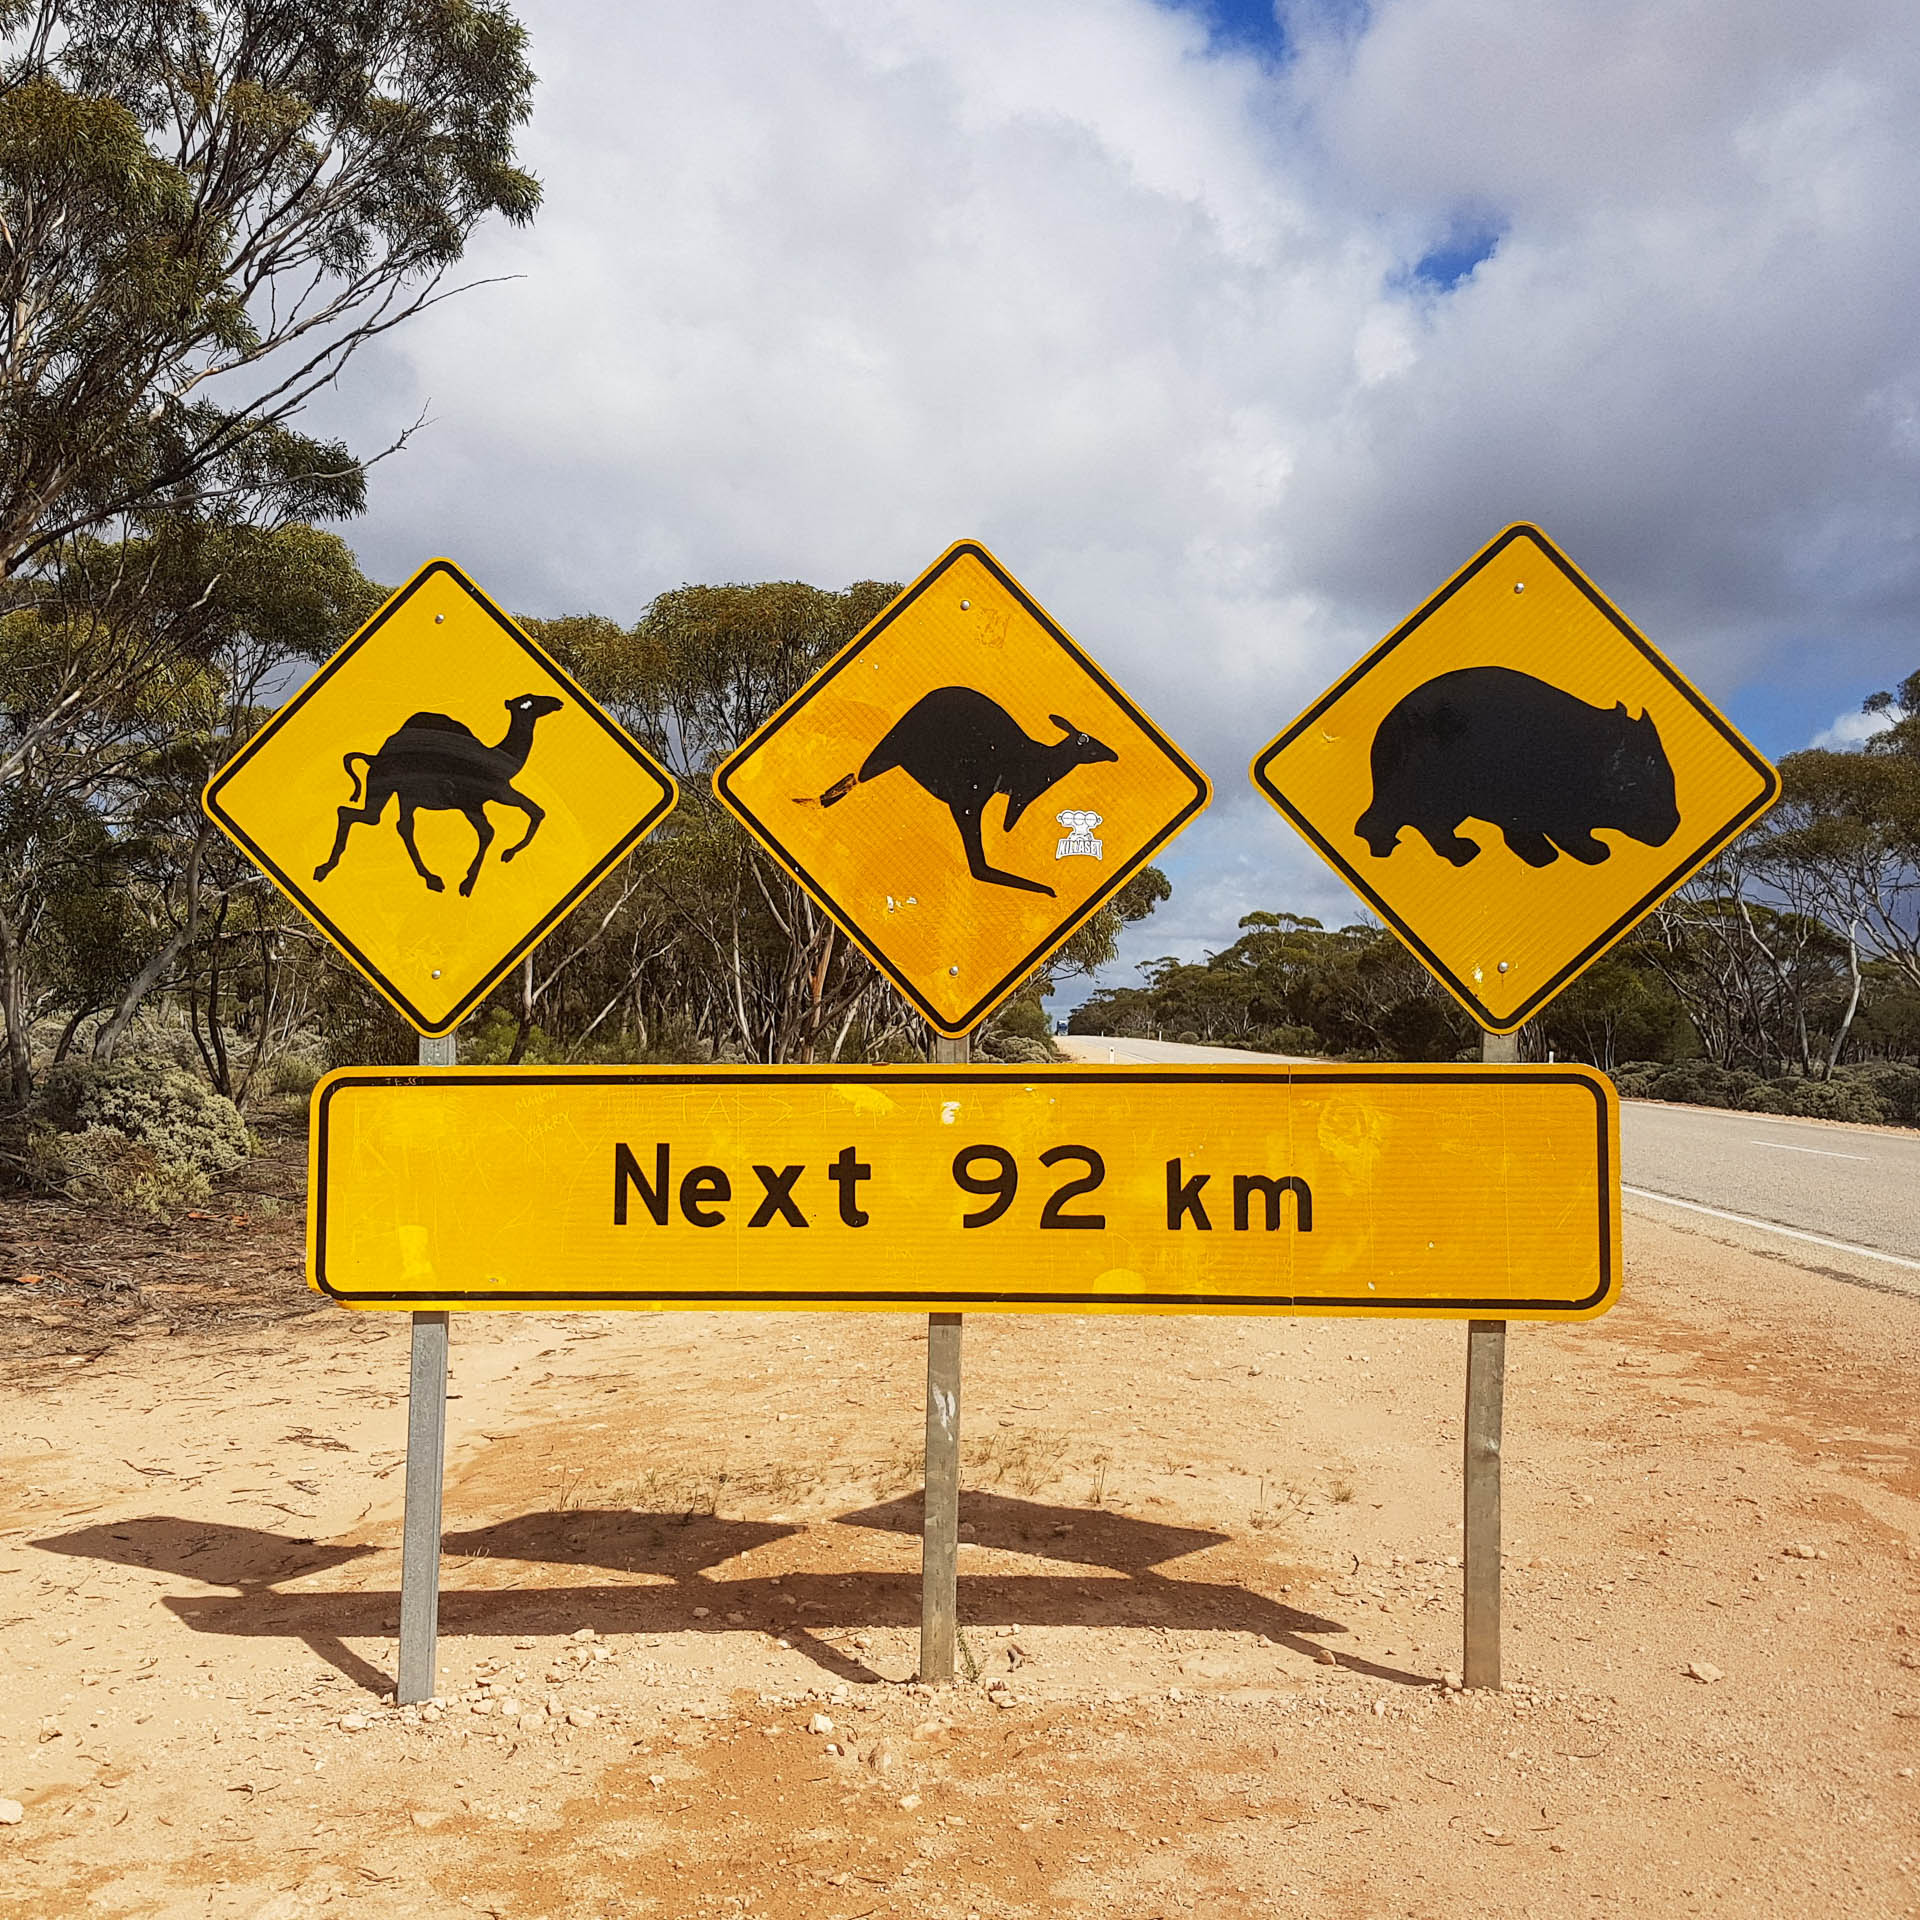 We Road Tripped From Sydney to Perth With a Three-Month-Old, roadtrip, van life, three road signs displaying a camel kangaroo and wombat